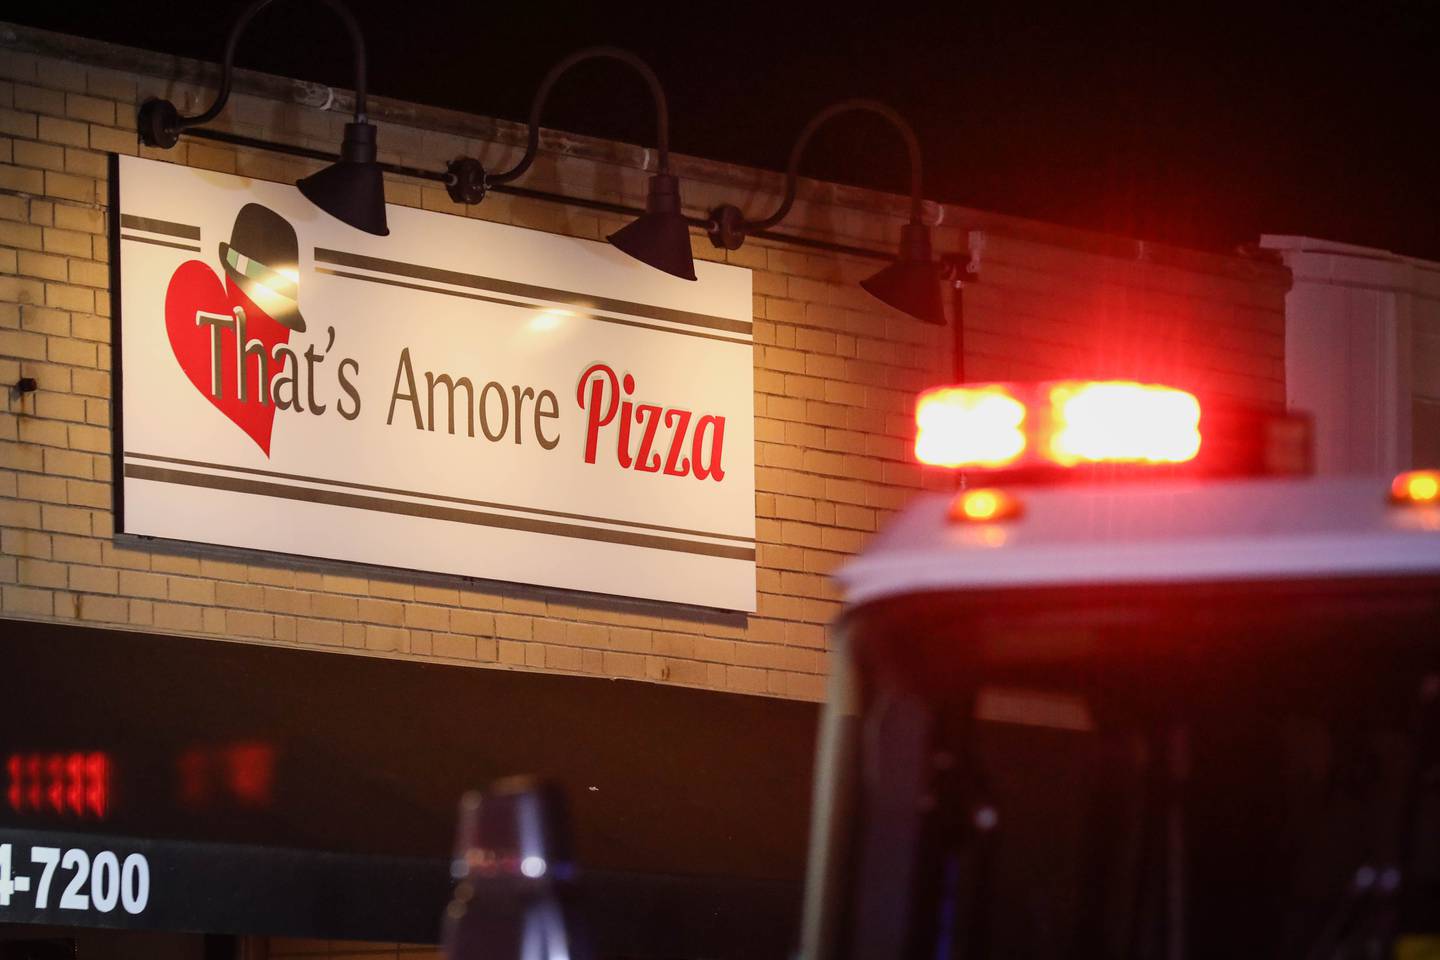 That’s Amore Pizza, at 105 N. Main St. in downtown Crystal Lake Metra station, sustained “minimal damage” following a fire Thursday, May 19, 2022, and will be temporarily closed as it conducts repairs, the restaurant said in a Facebook post.